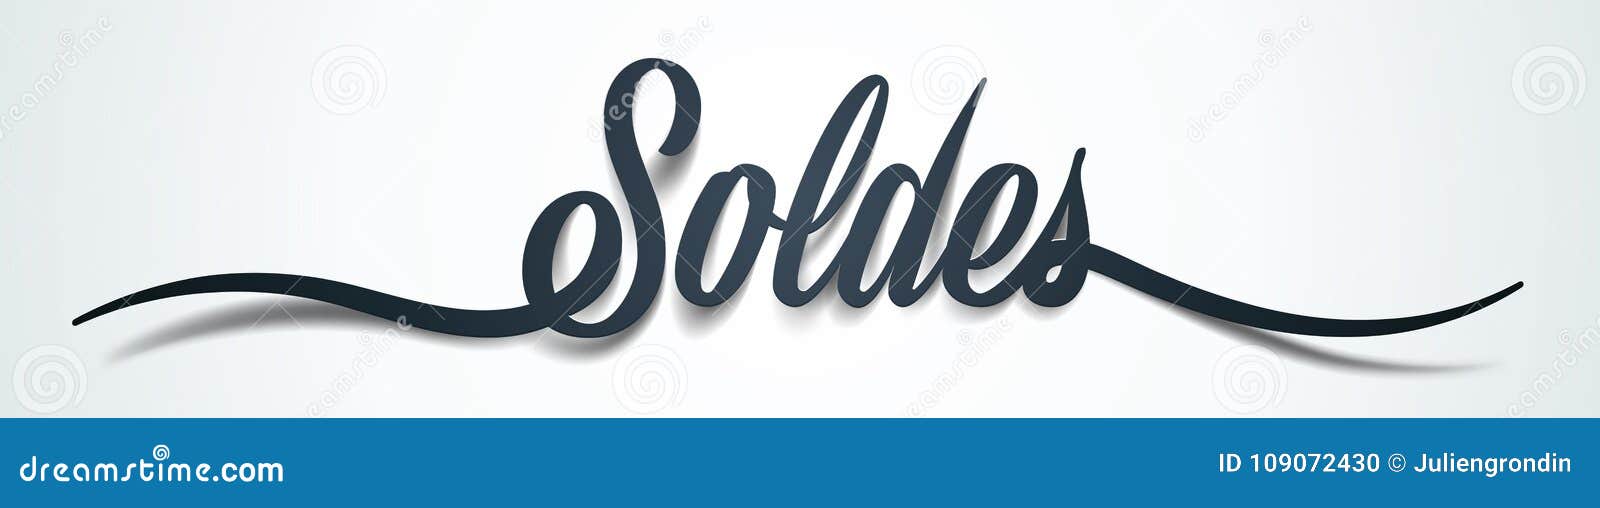 sale in french : soldes